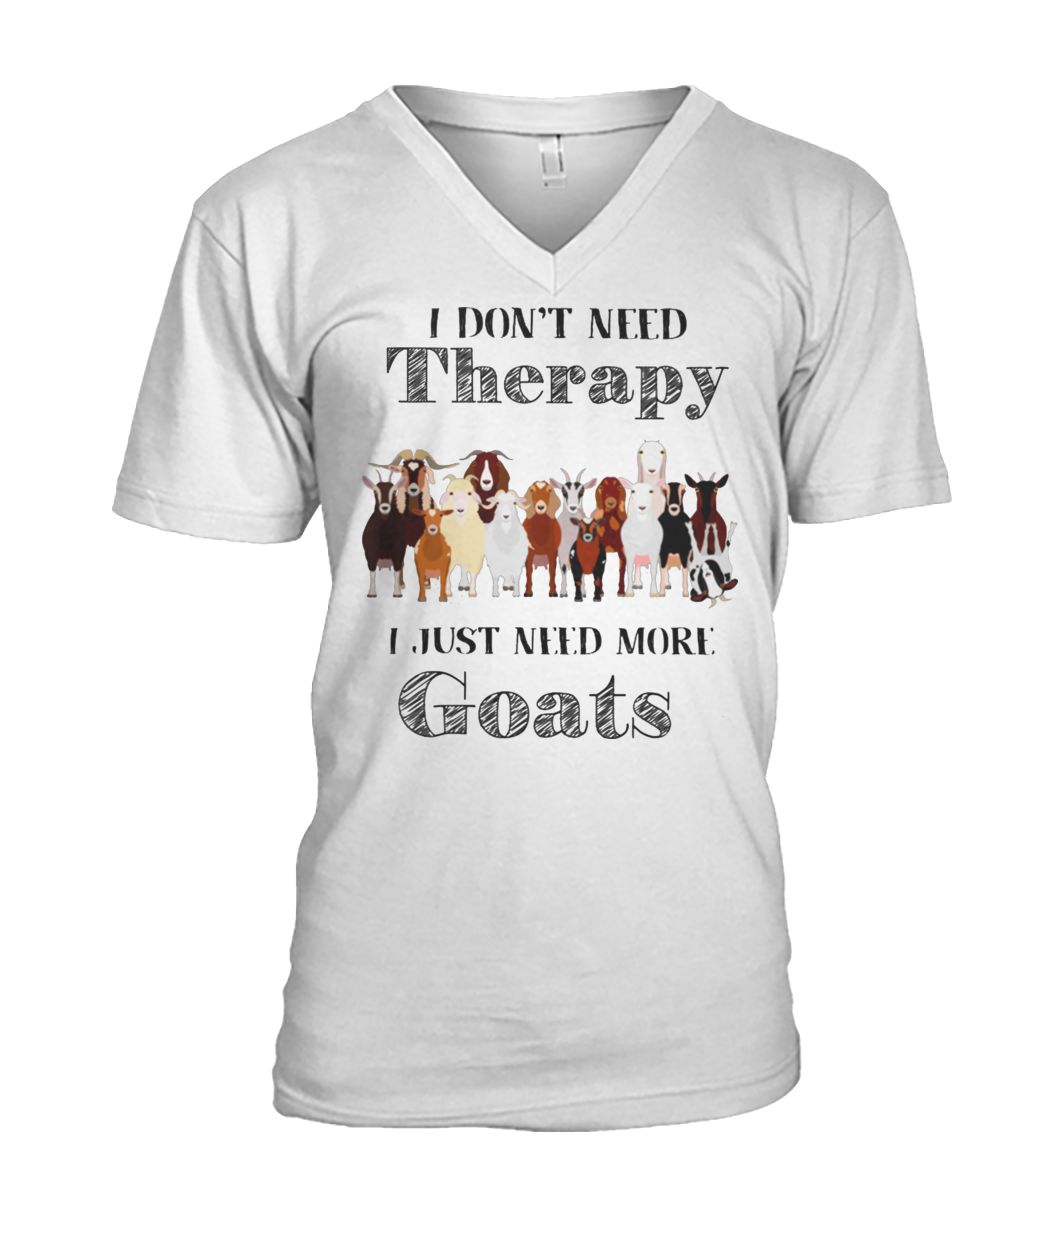 I don't need therapy I just need more goats mens v-neck